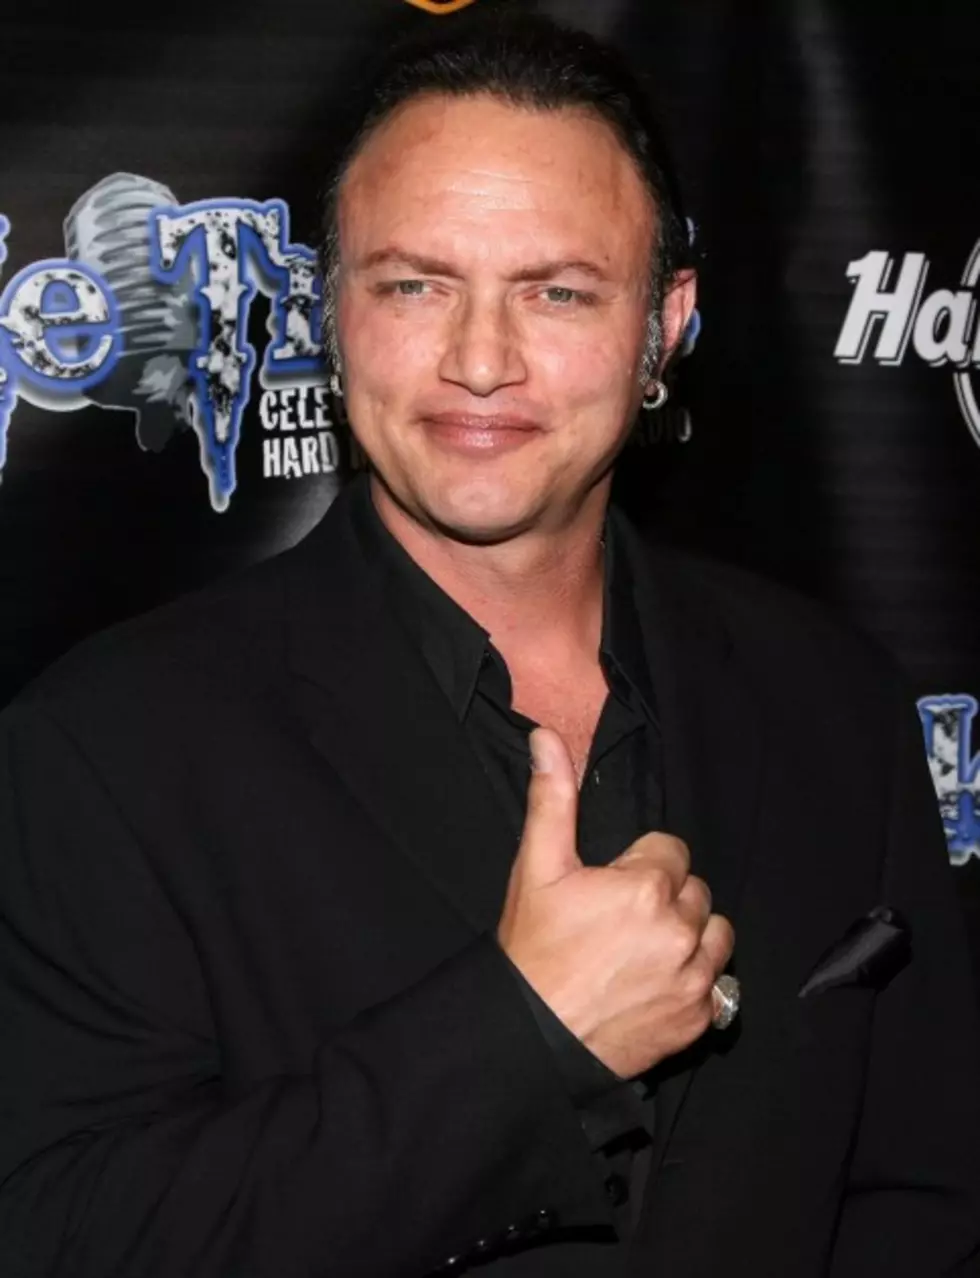 April 10th Geoff Tate comes to the Mesa Theater